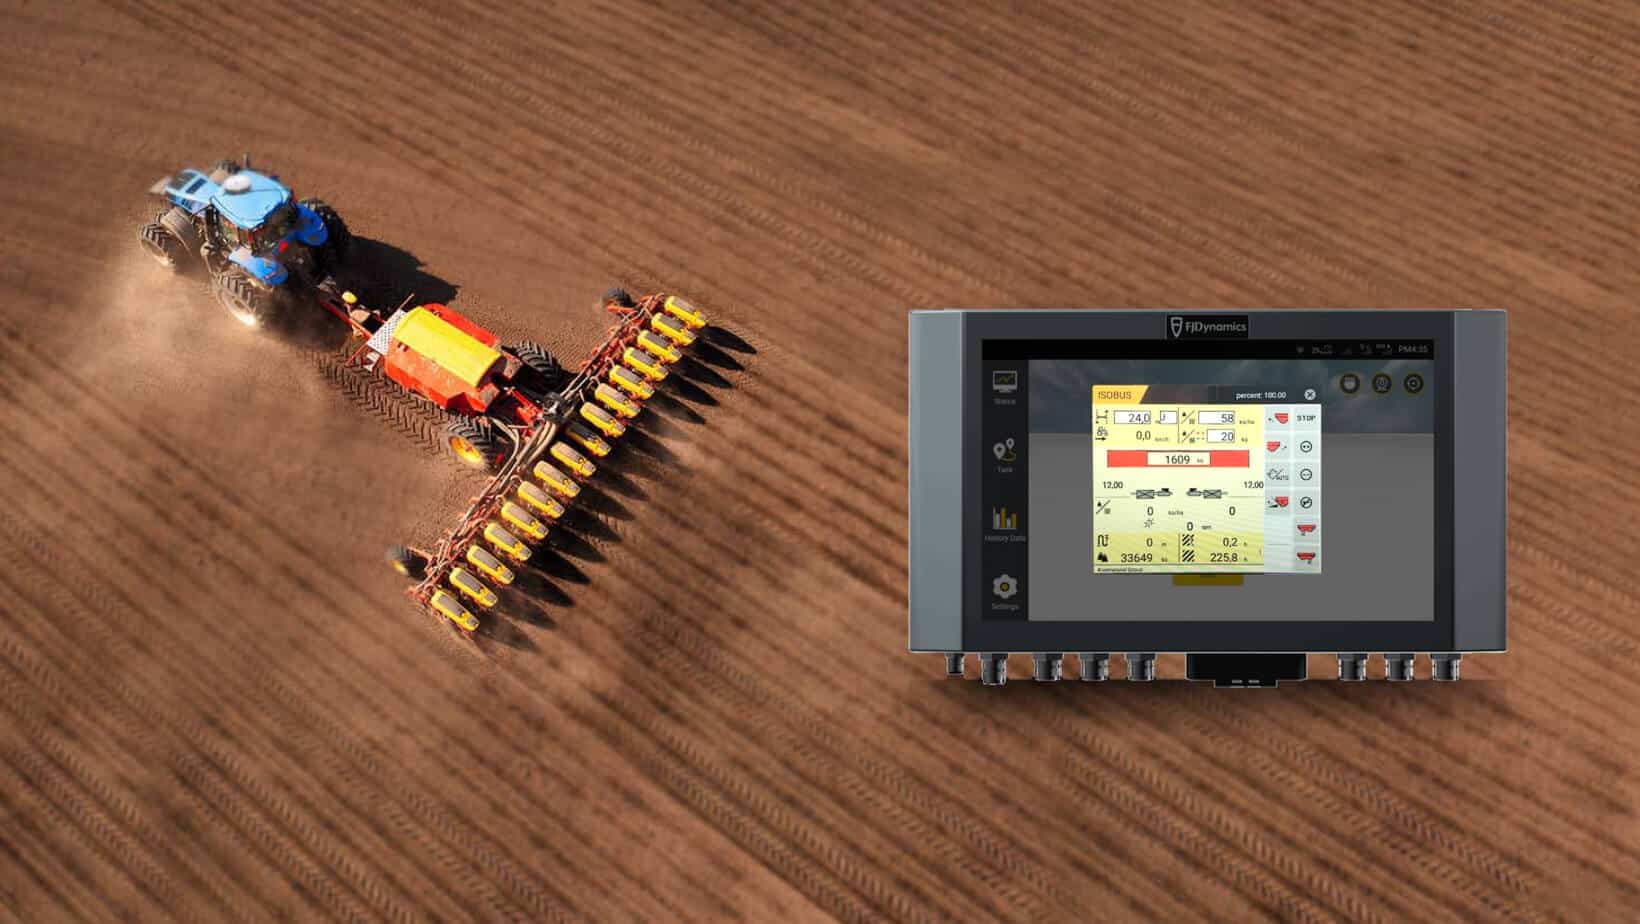 The UT is a plug-and-play user interface for any ISOBUS-compatible implements. It visualizes data and allows users to check and control the implement through FJD's control terminal.